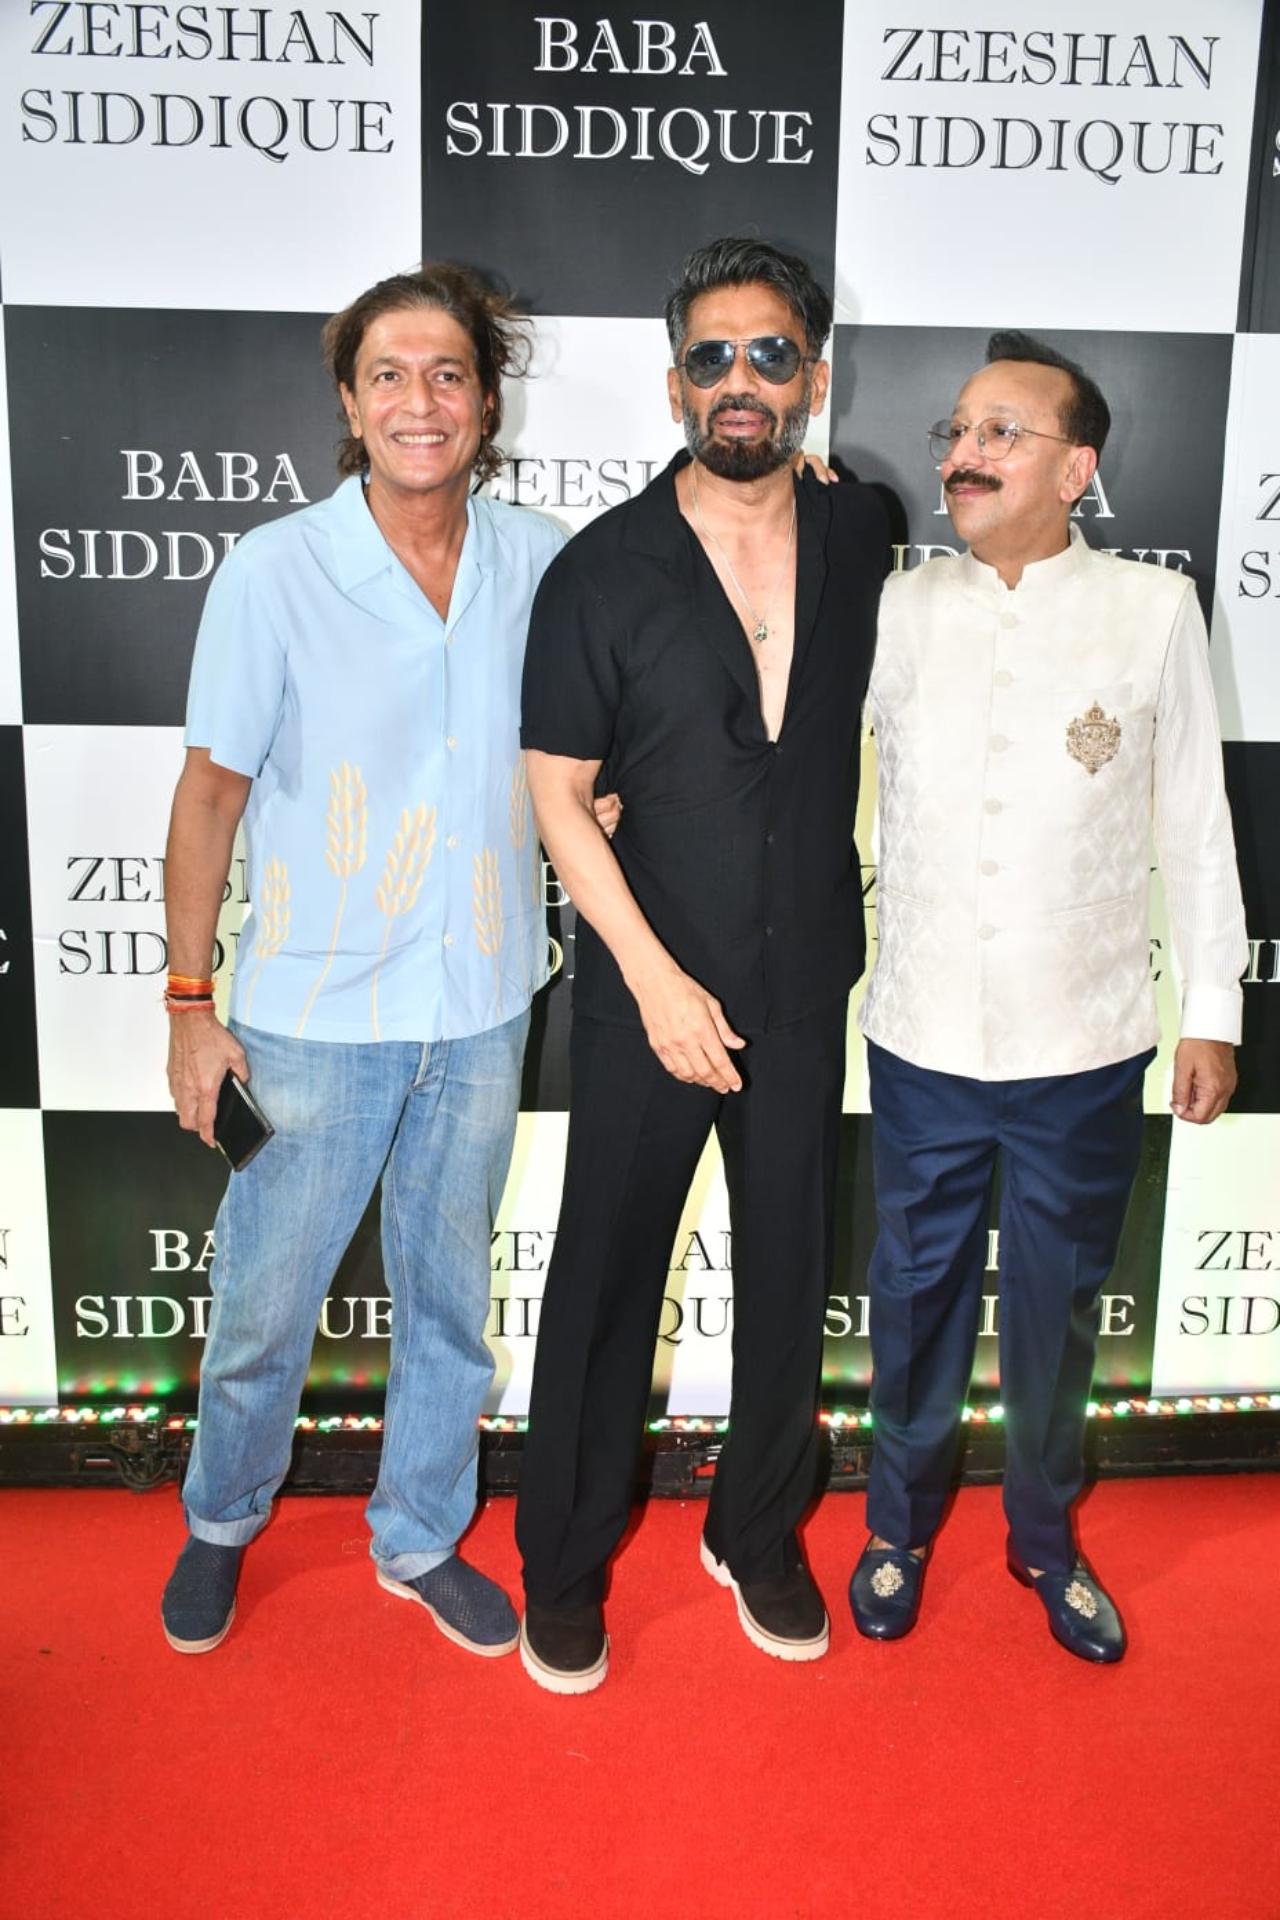 Suniel Shetty came dressed in an all-black outfit while Chunky looked cool in a blue outfit. The duo posed with host Baba Siddique